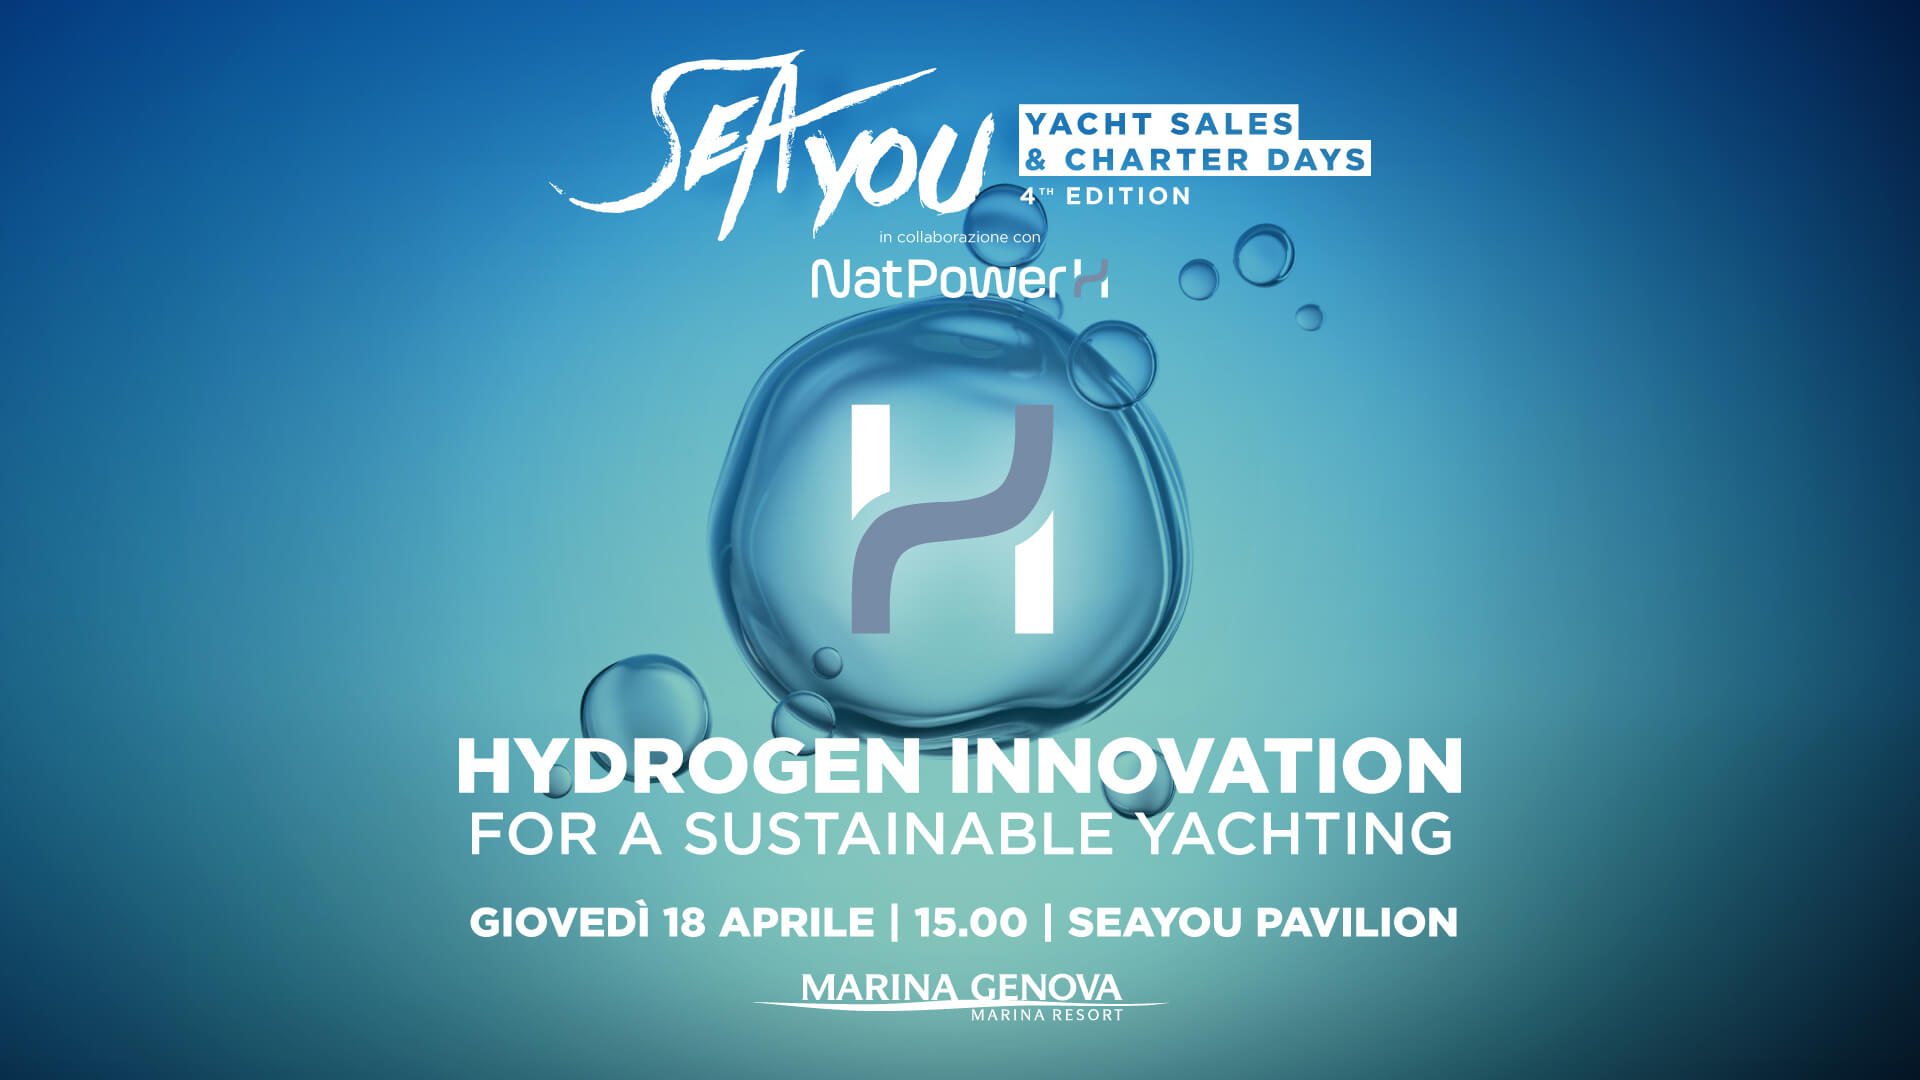 Featured Image for “Hydrogen Innovation for a Sustainable Yachting – SeaYou Yach Sales & Charter Days”